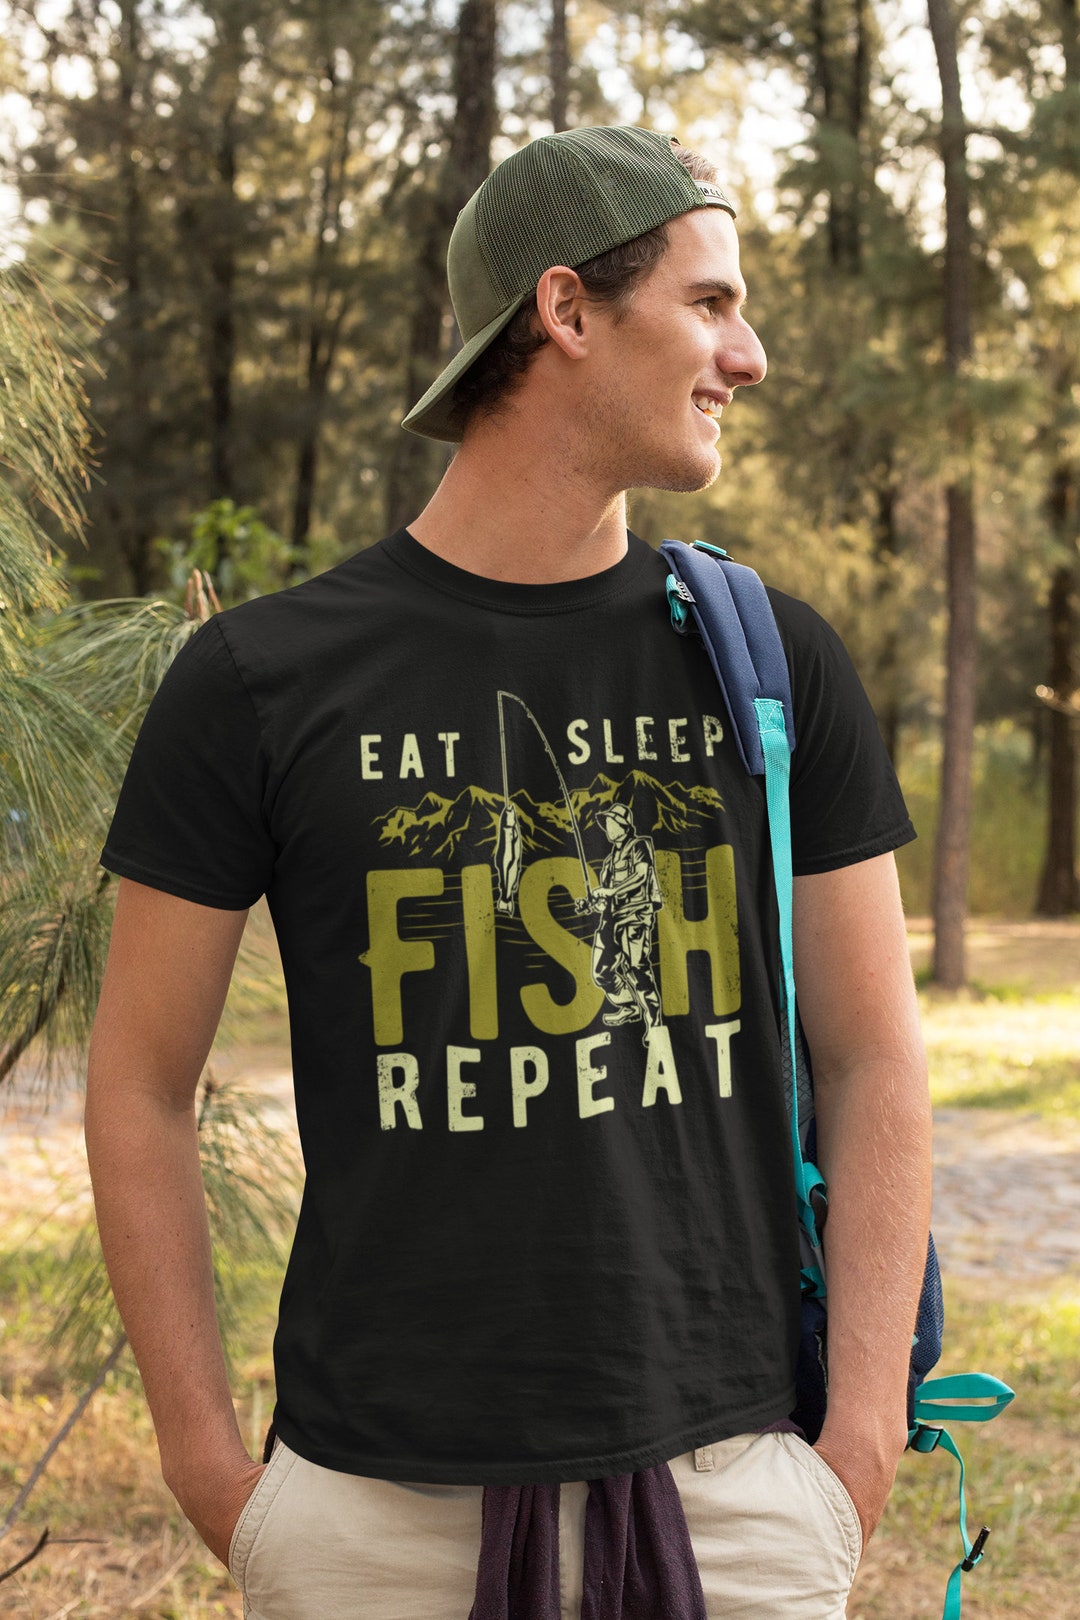 Eat Sleep Fish Repeat T-shirt Funny Gift for Fisherman Vintage